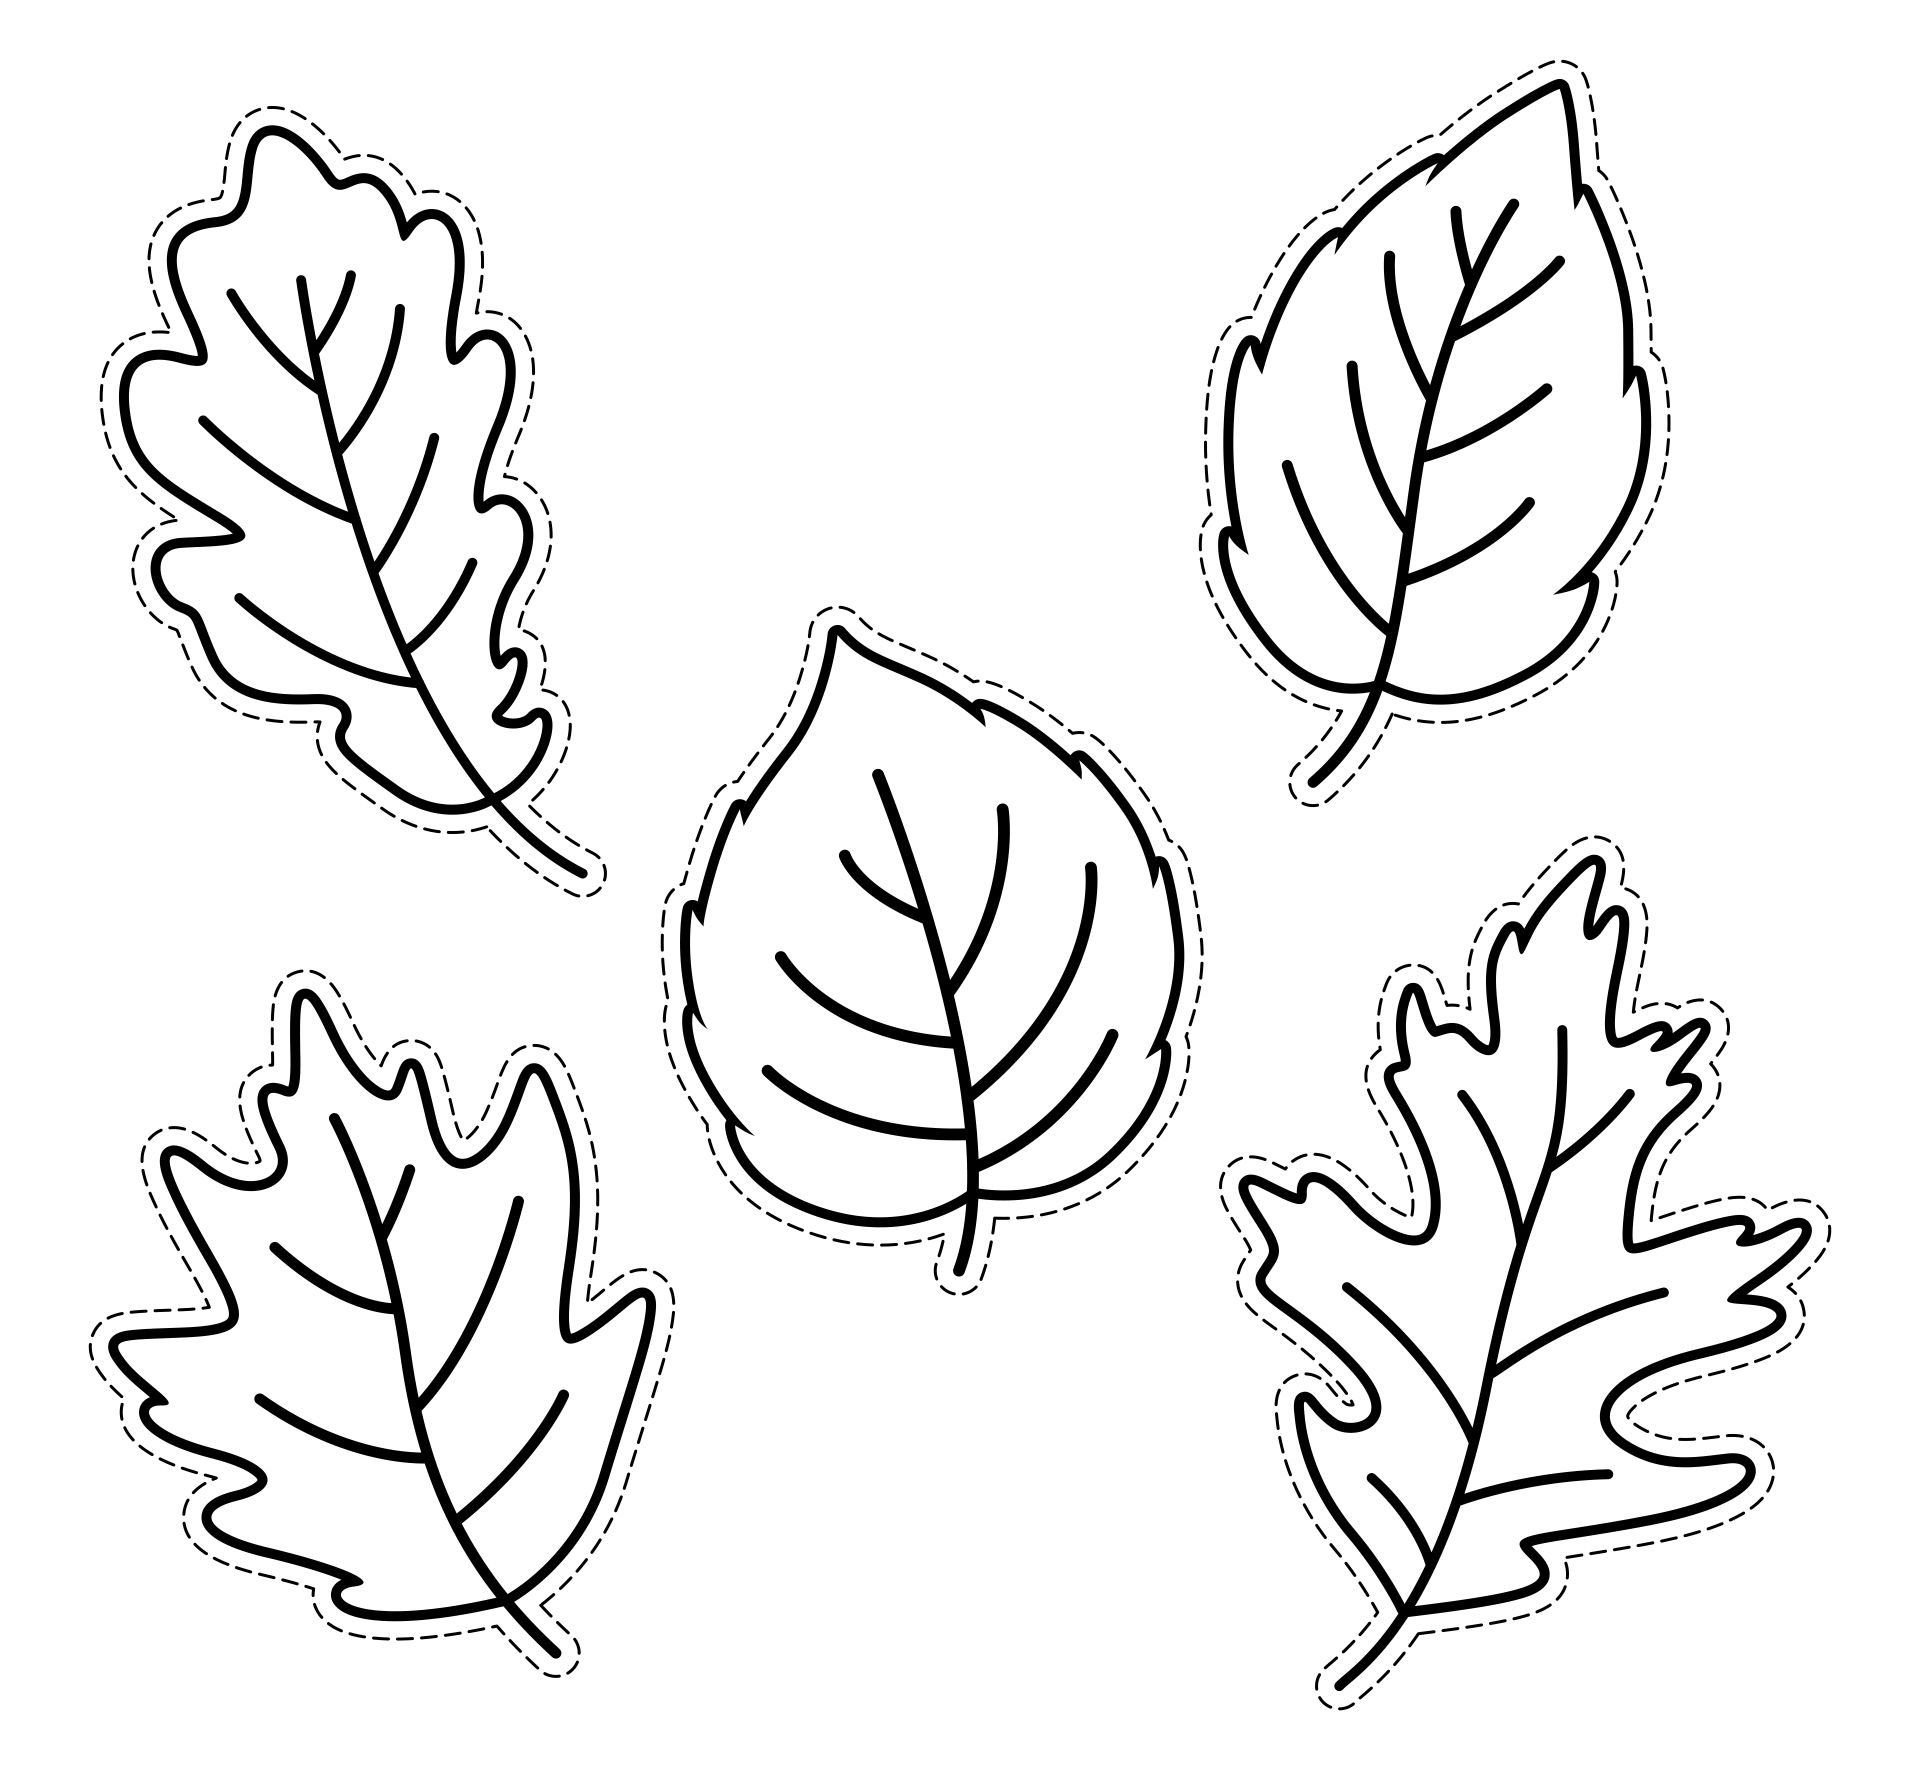 10-best-printable-fall-leaves-shapes-pdf-for-free-at-printablee